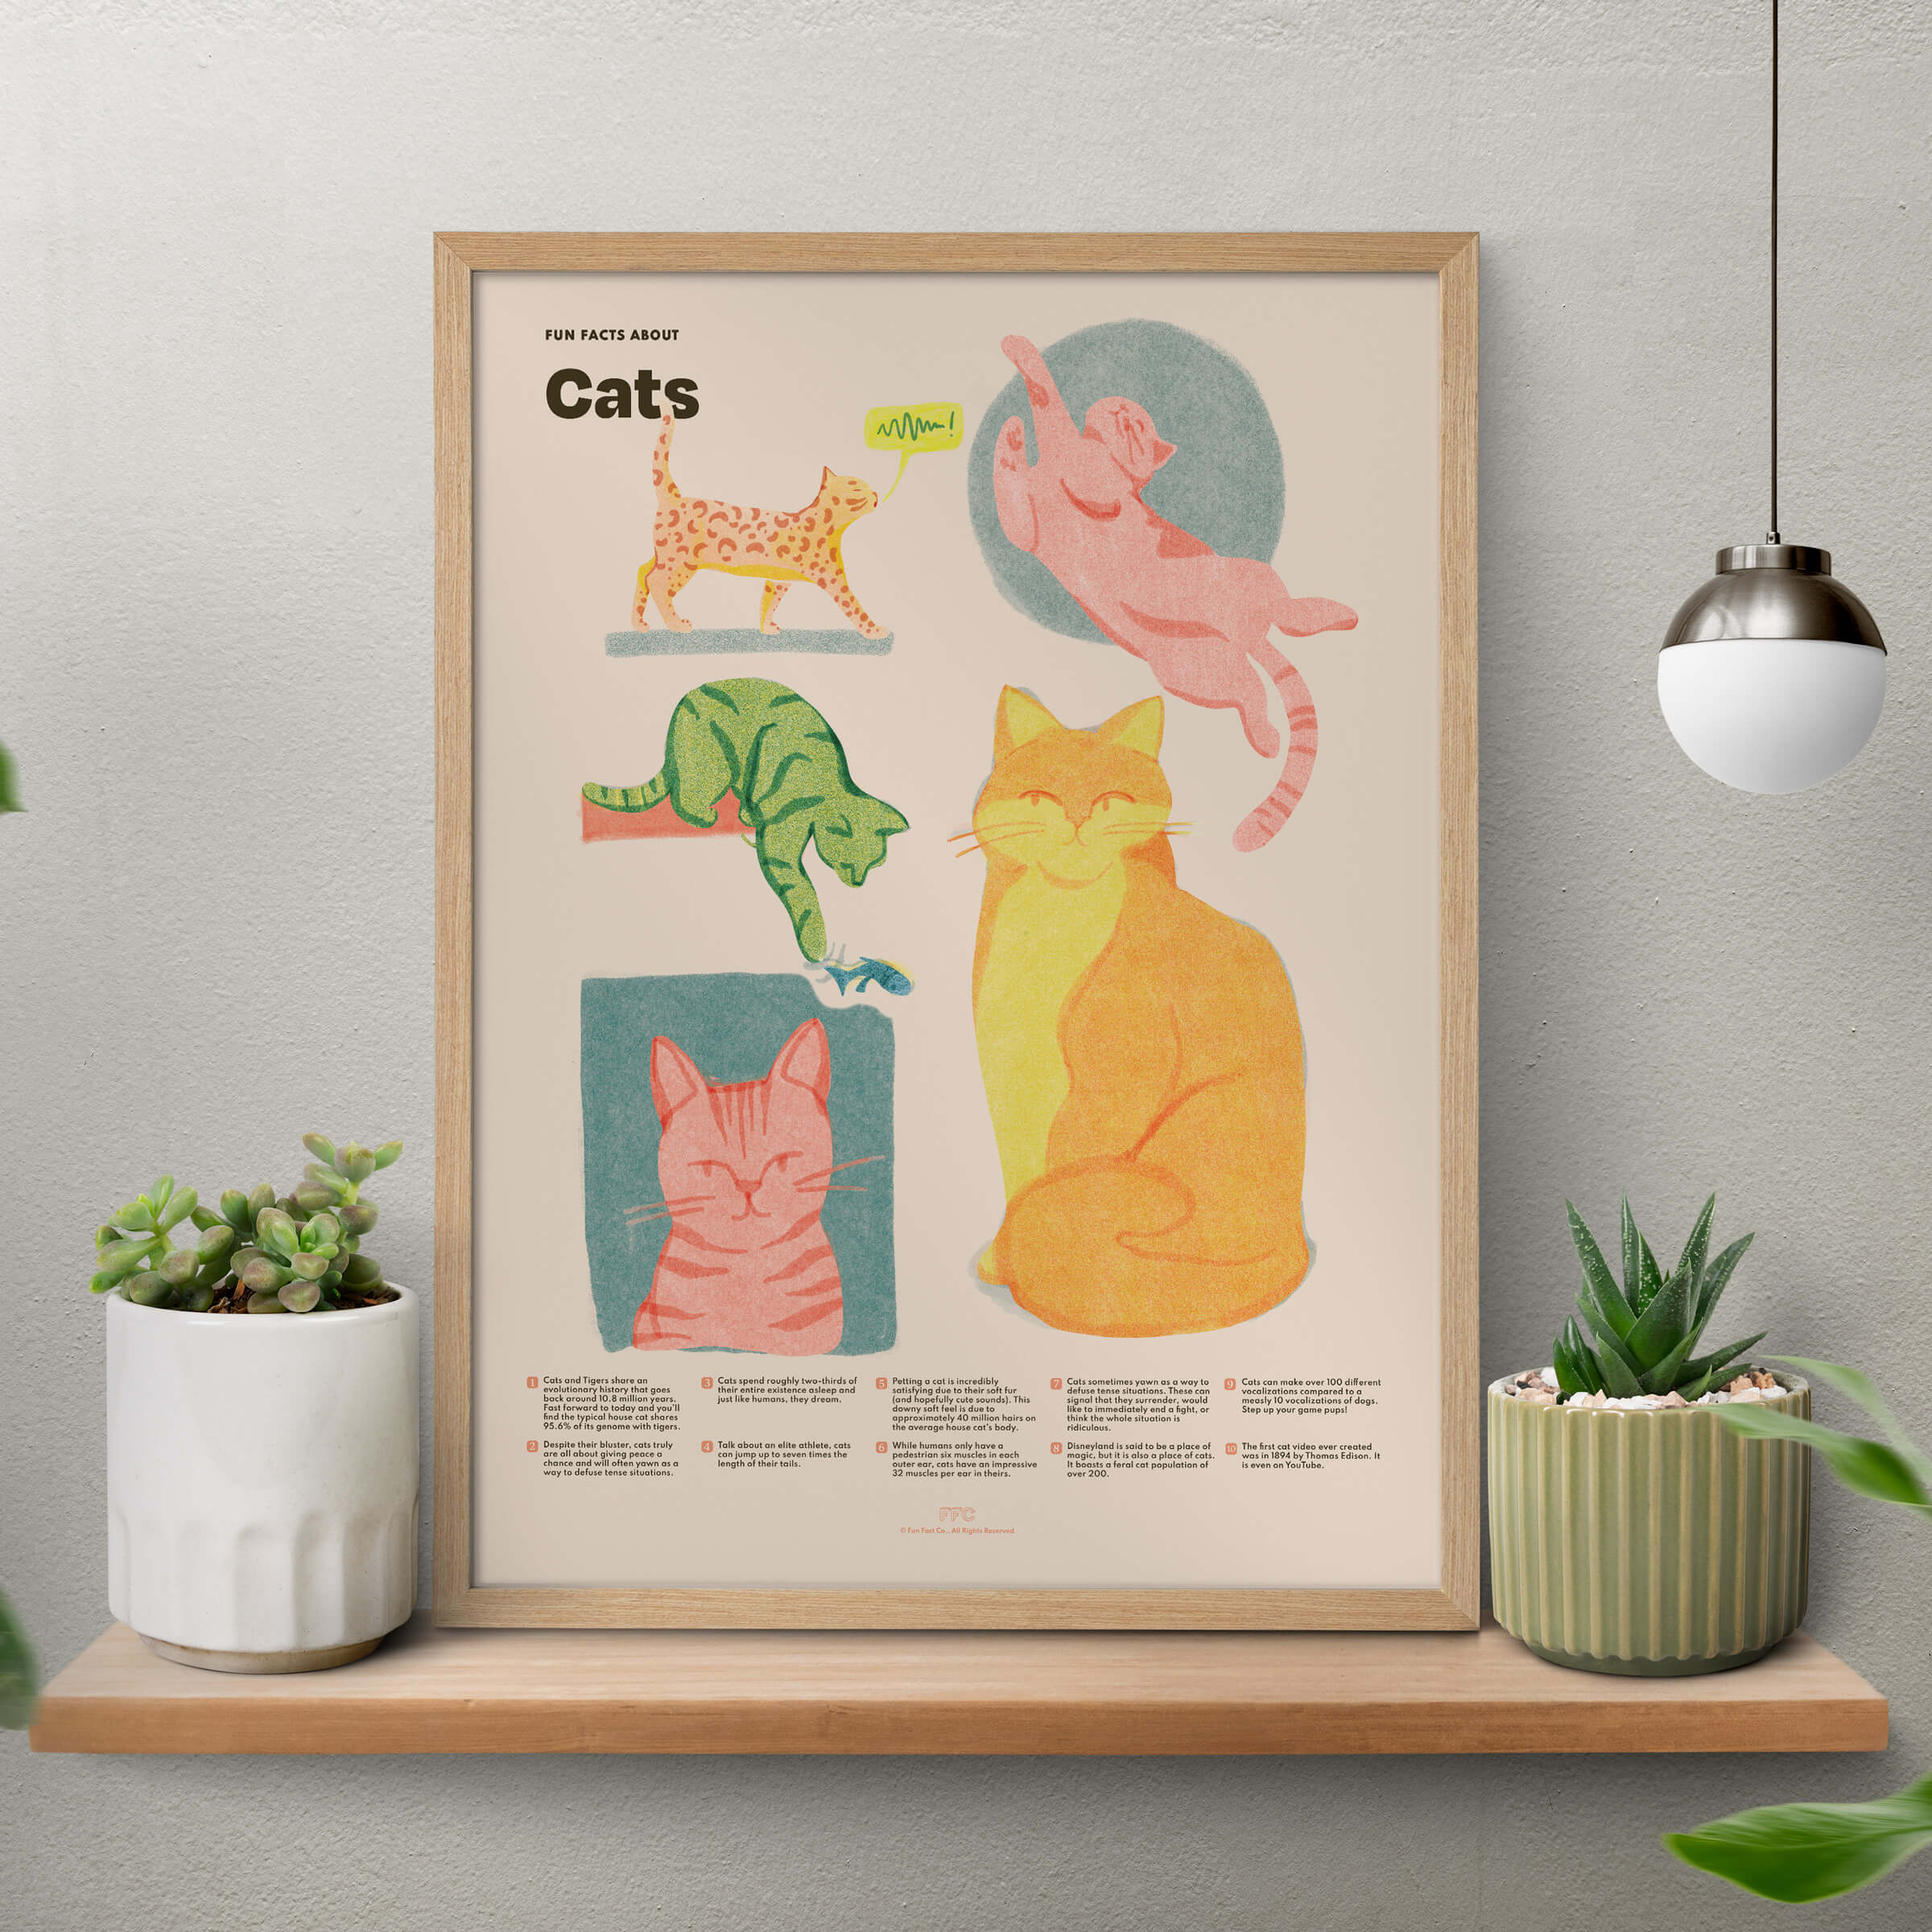 More Fun Facts about Cats - in Print Form